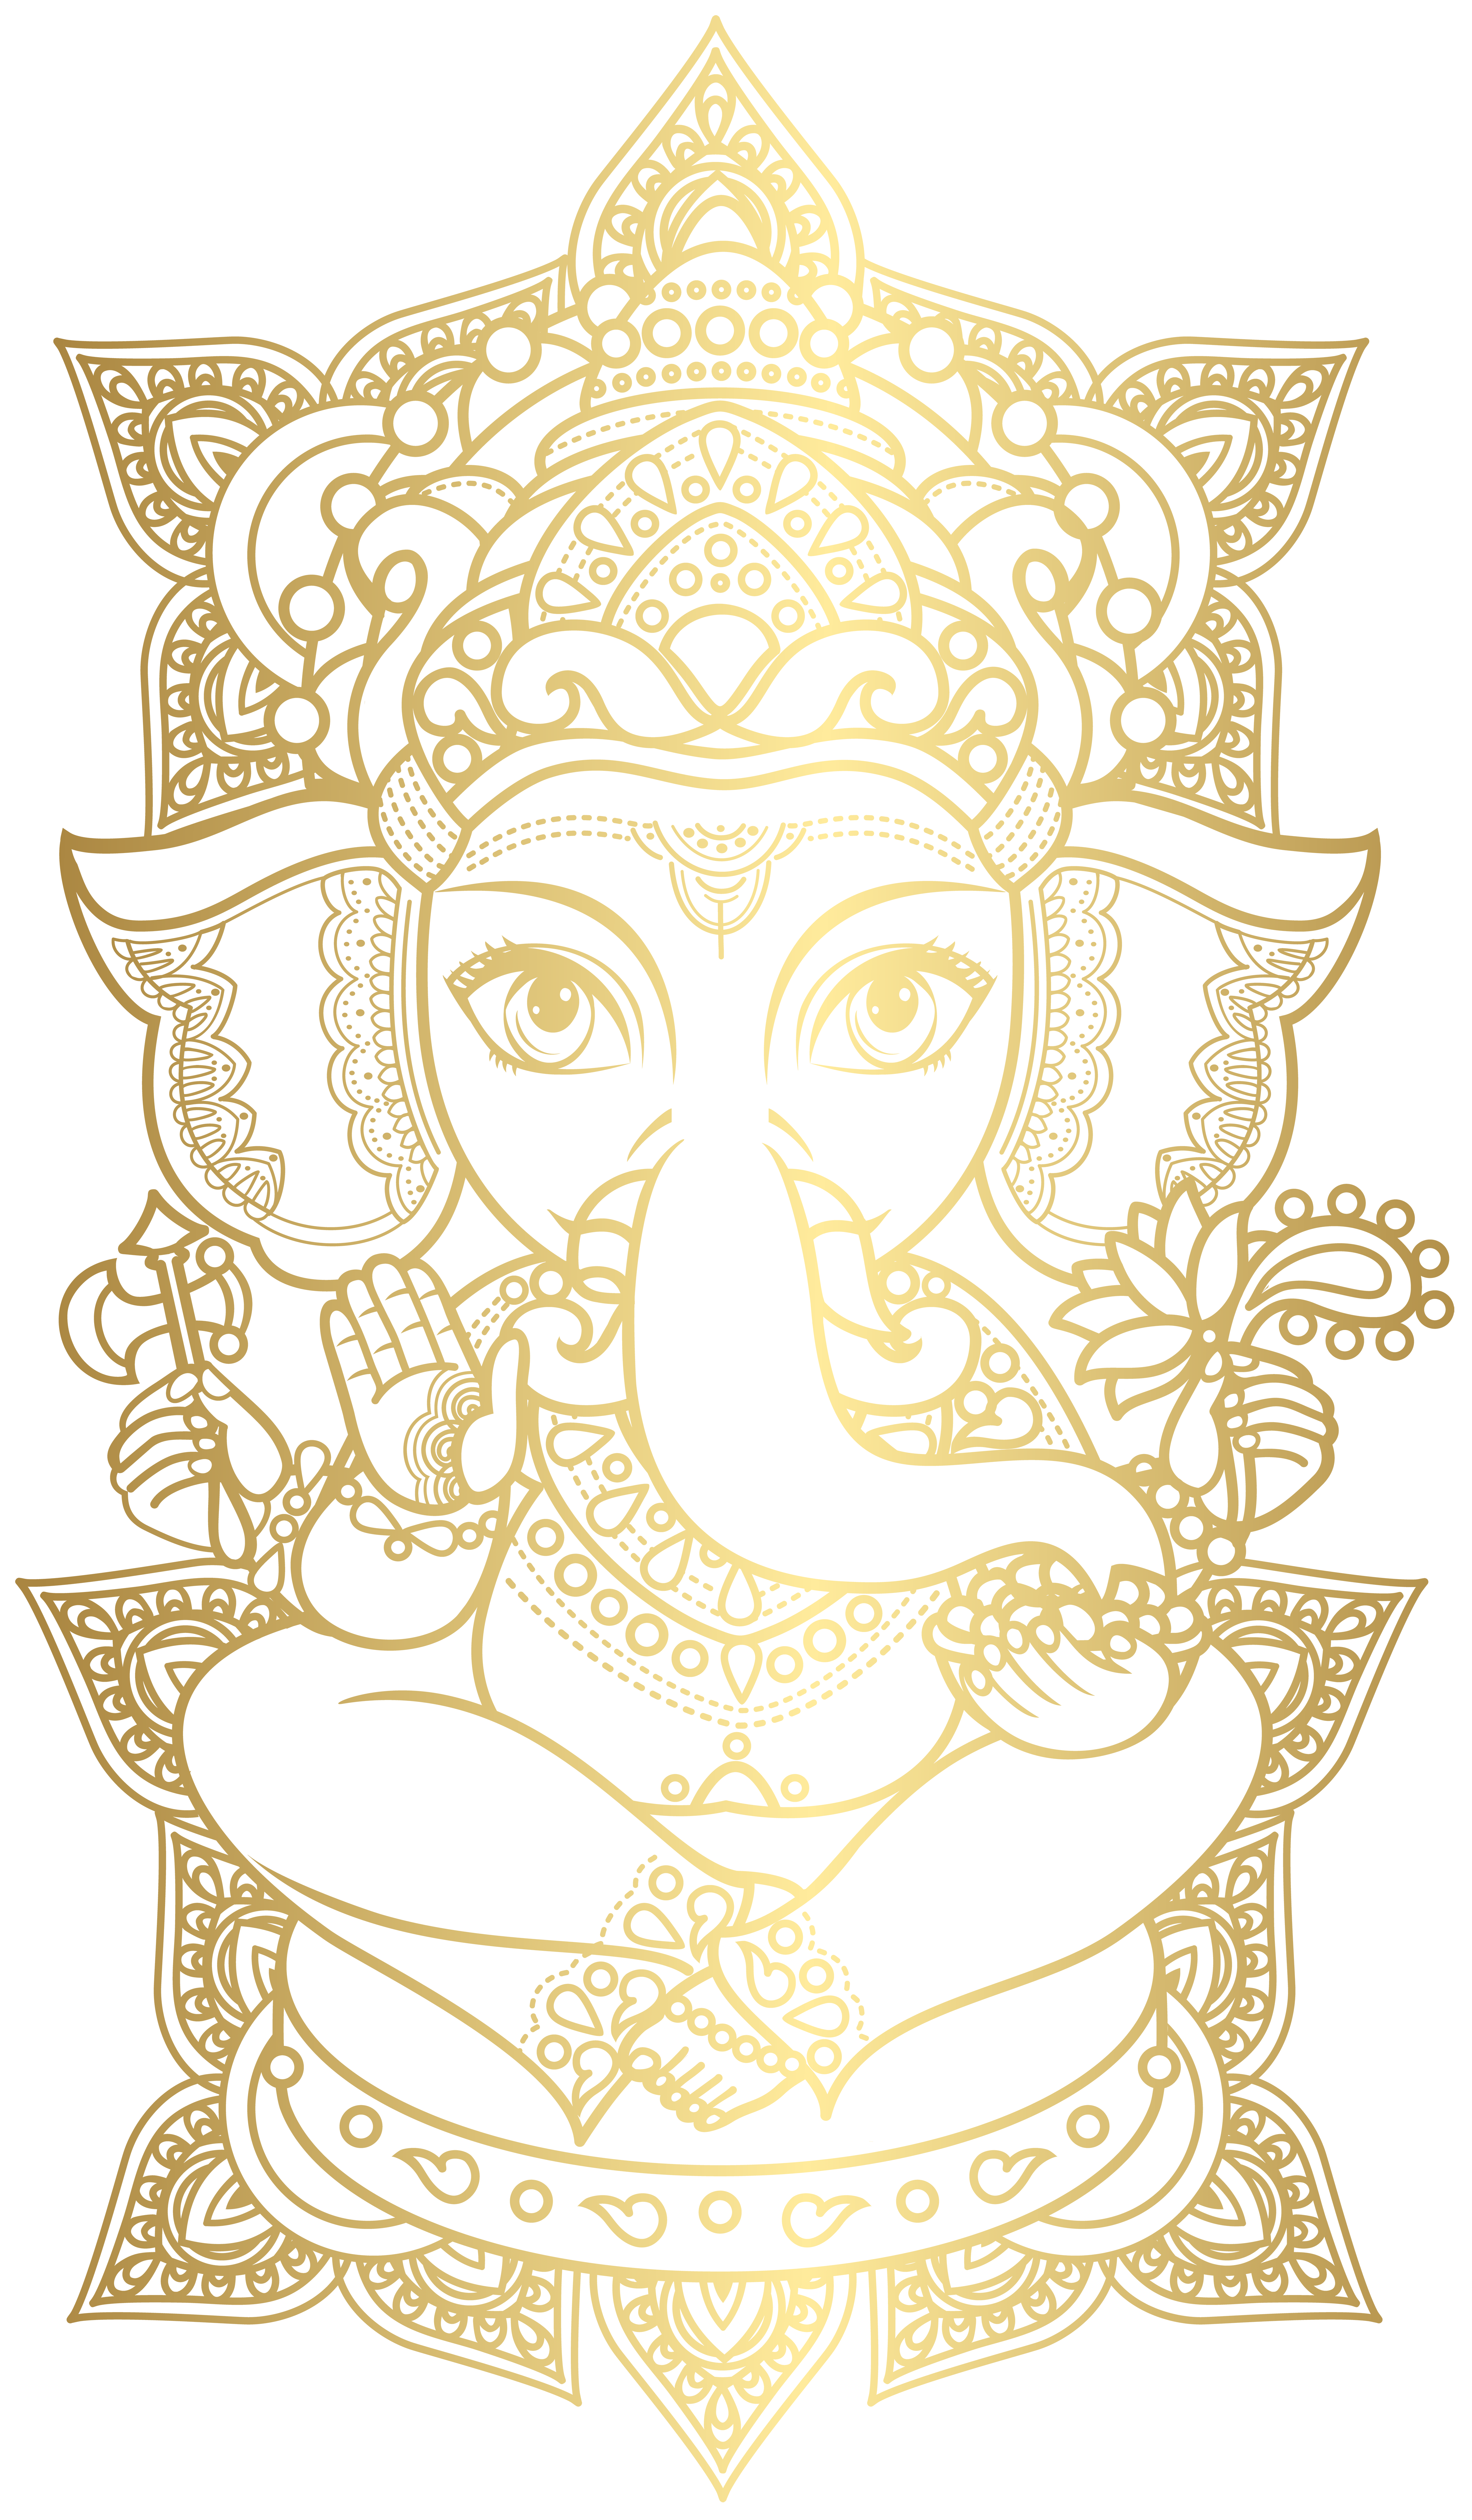 Lord Ganesha Png Free Download - Photo #315 - PngFile.net | Free PNG Images  Download